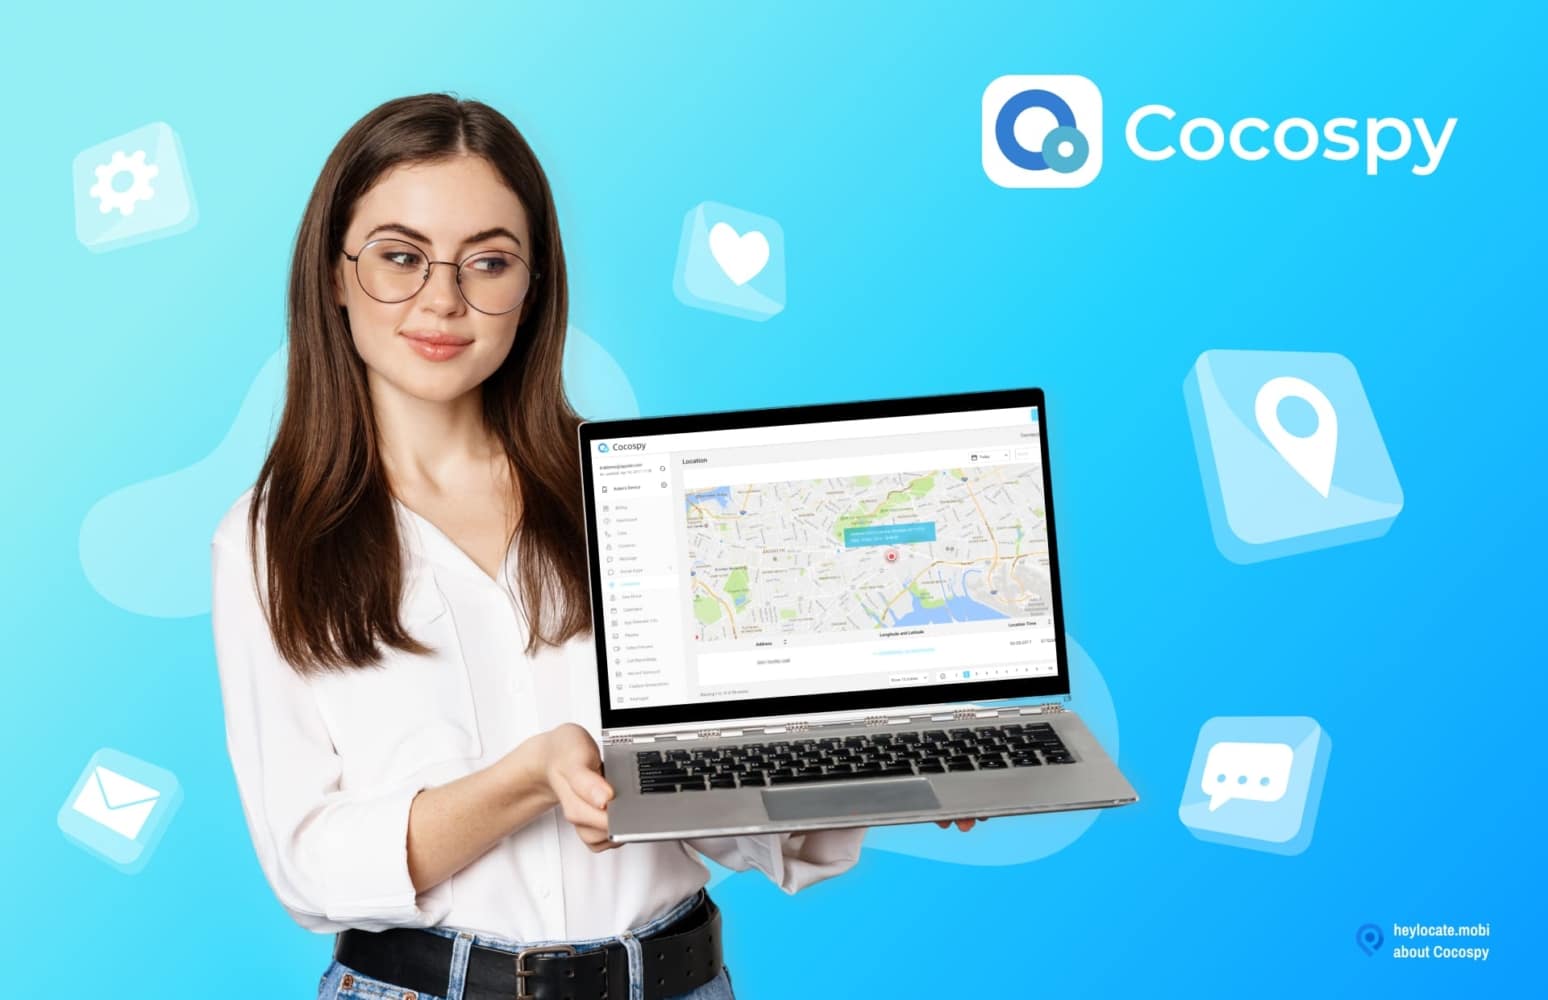 A image featuring a person holding a laptop that displays the Cocospy application interface, showing a map with location details.